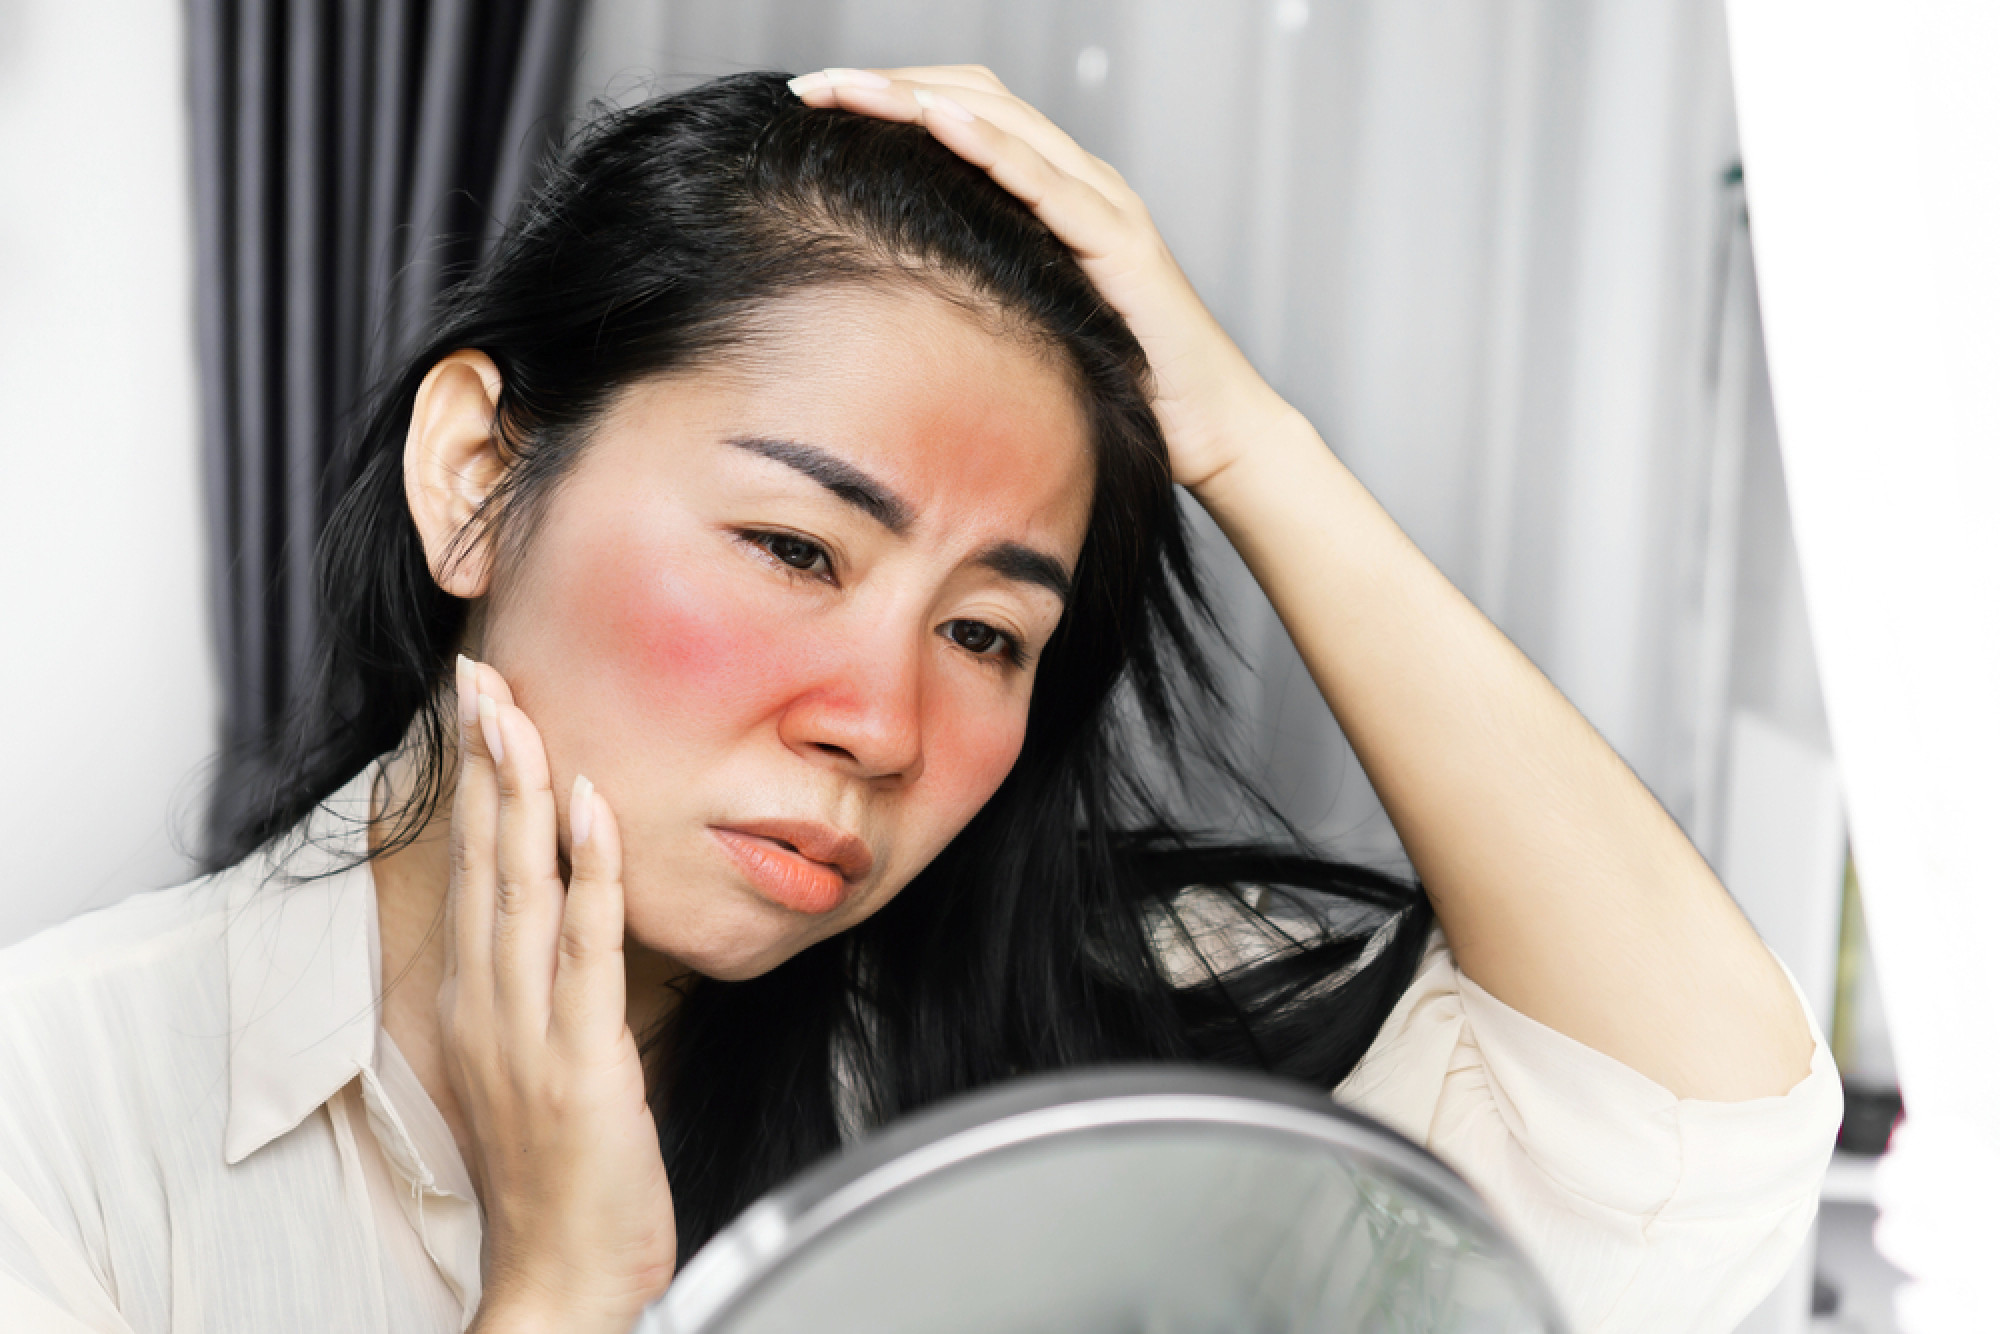 We sometimes don’t see sun damage until years after exposure. Photo: Shutterstock